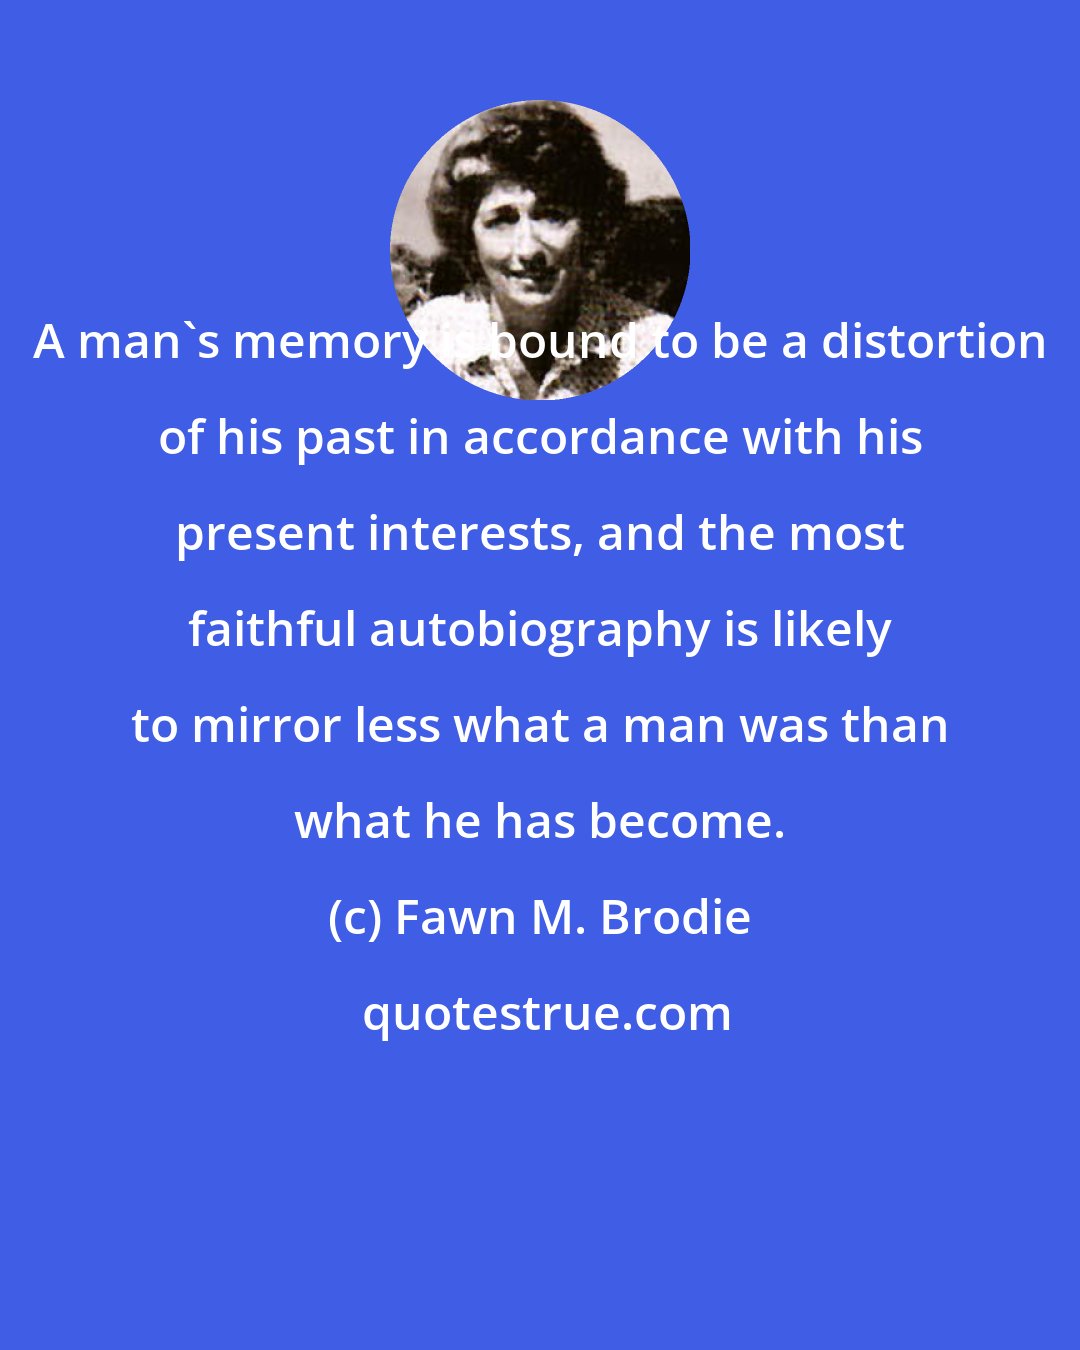 Fawn M. Brodie: A man's memory is bound to be a distortion of his past in accordance with his present interests, and the most faithful autobiography is likely to mirror less what a man was than what he has become.